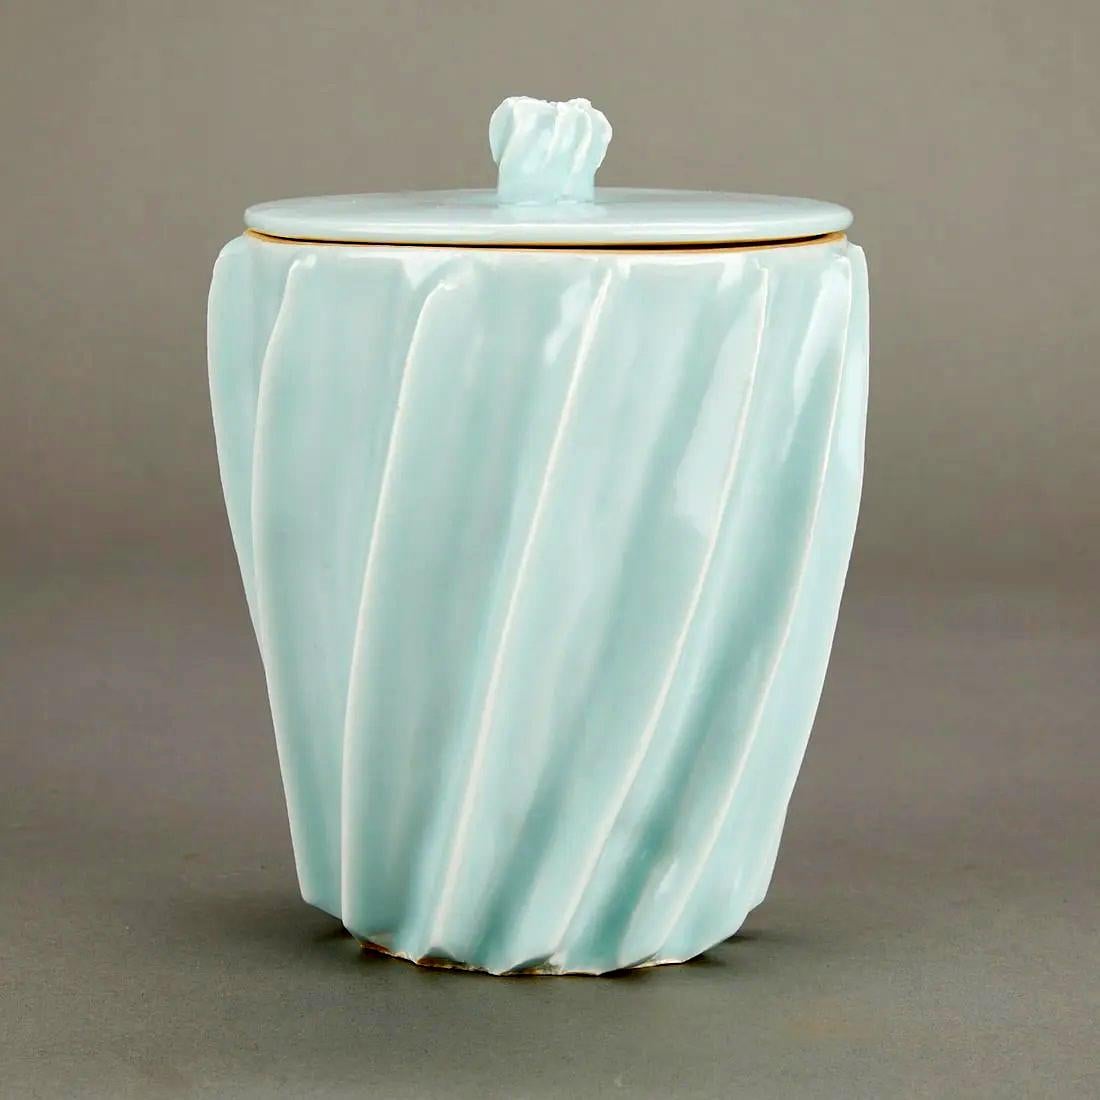 A ceramic lidded celadon vessel made by Japanese potter Uichi Shimizu (1926-2004) circa post 1980s. The vessel was known as Mizusashi in Japanese and used as a freshwater container to refill the Kama kettle during the Chado tea ceremony. Quite